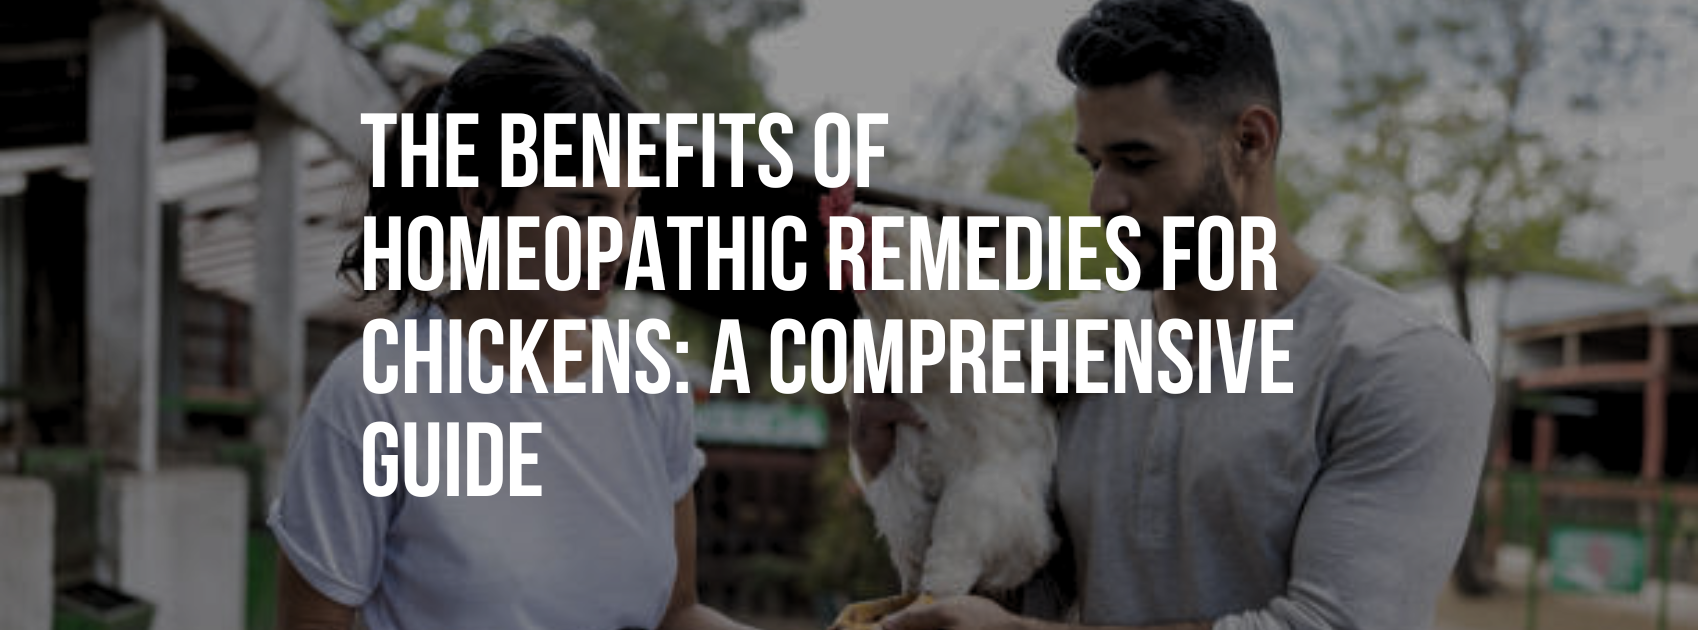 The Benefits of Homeopathic Remedies for Chickens: A Comprehensive Guide